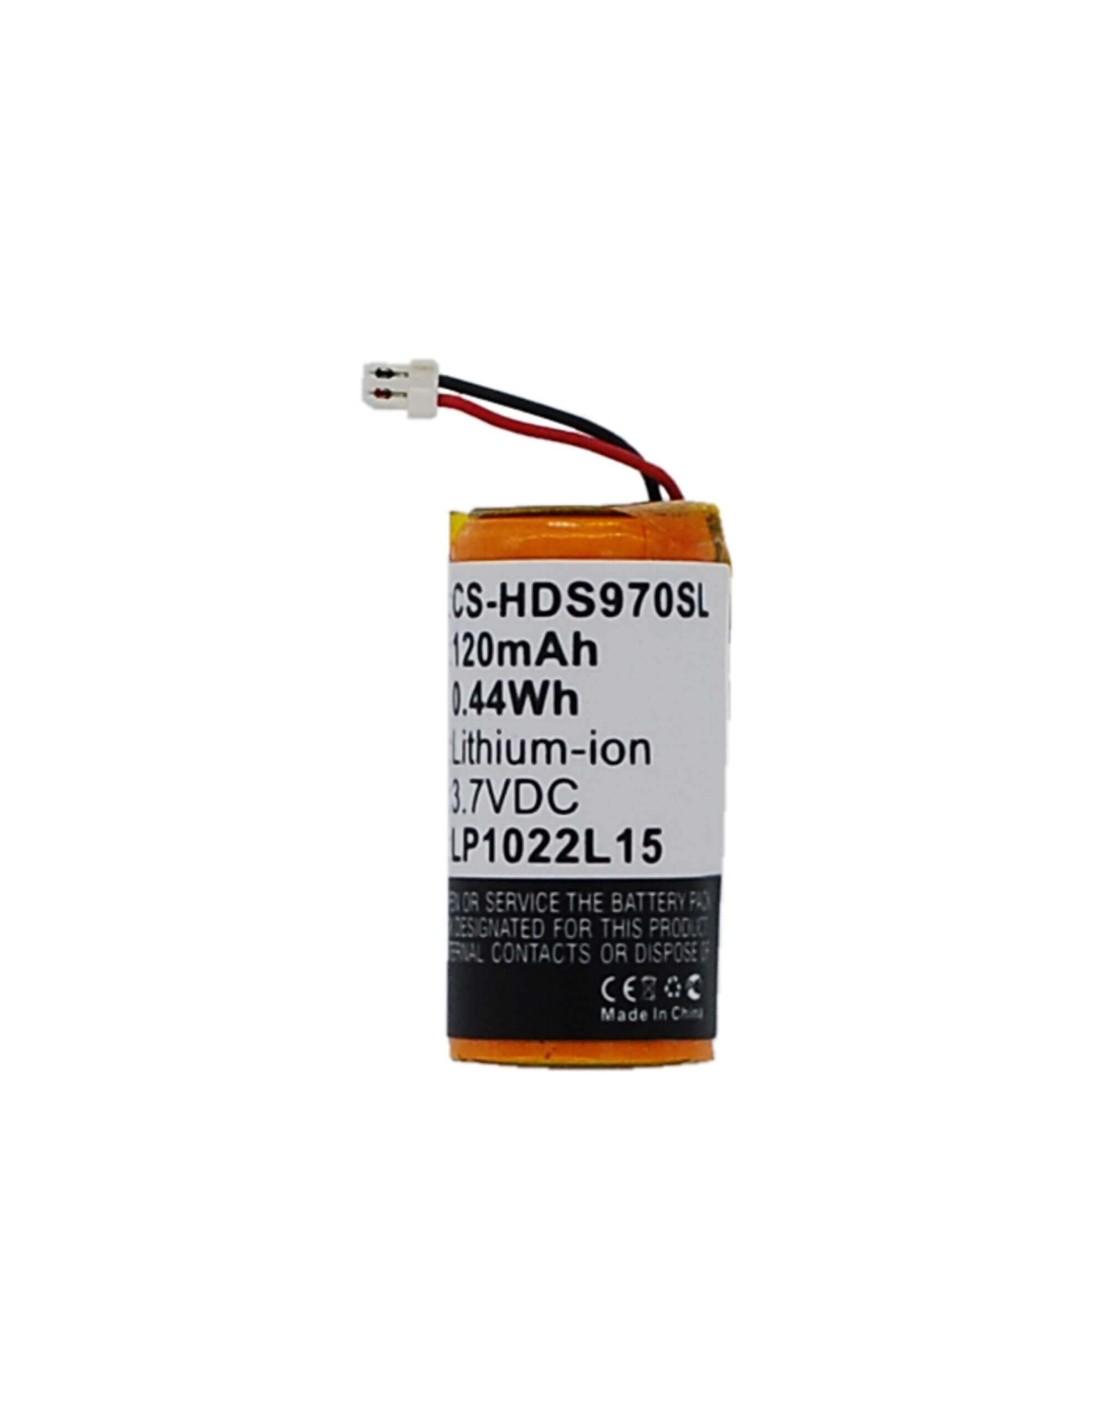 Battery for Sony Hbh-ds970 3.7V, 120mAh - 0.44Wh